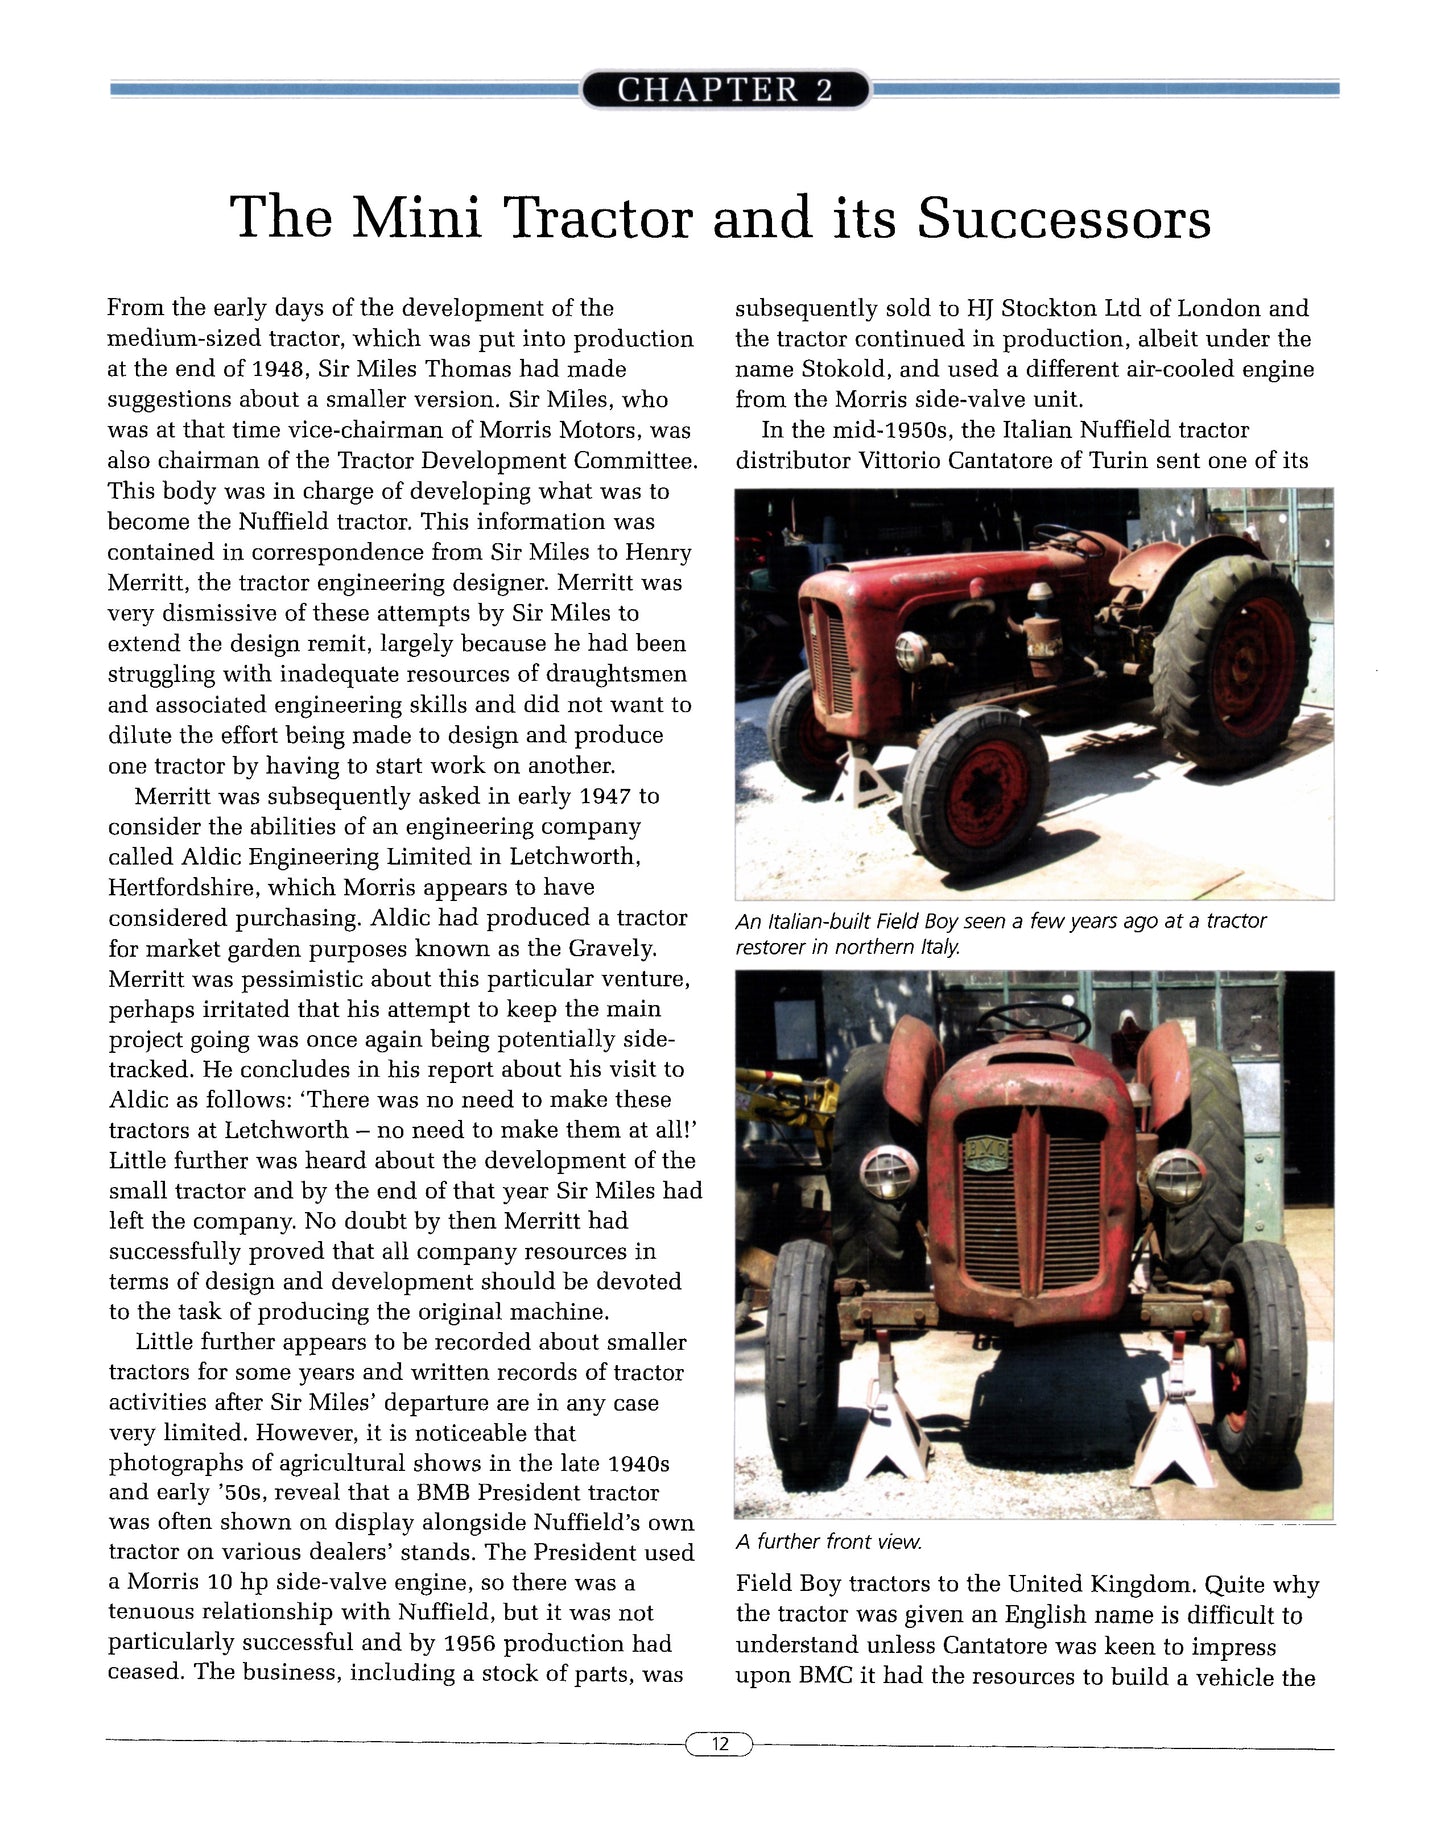 The Nuffield Tractor Story,: v. 2